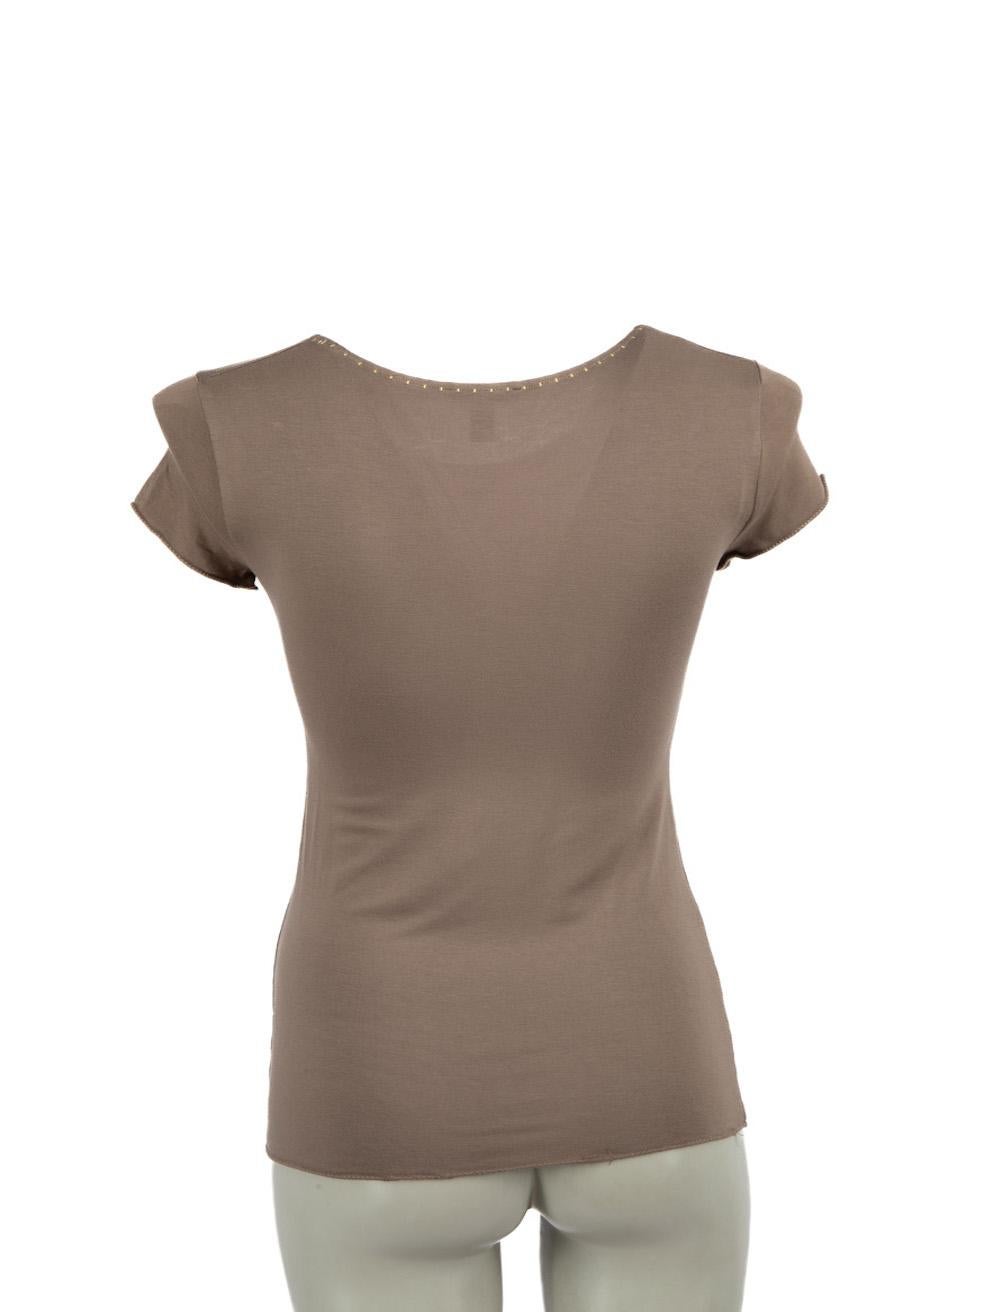 Chloé Taupe Logo Short Sleeve Top Size M In Excellent Condition For Sale In London, GB